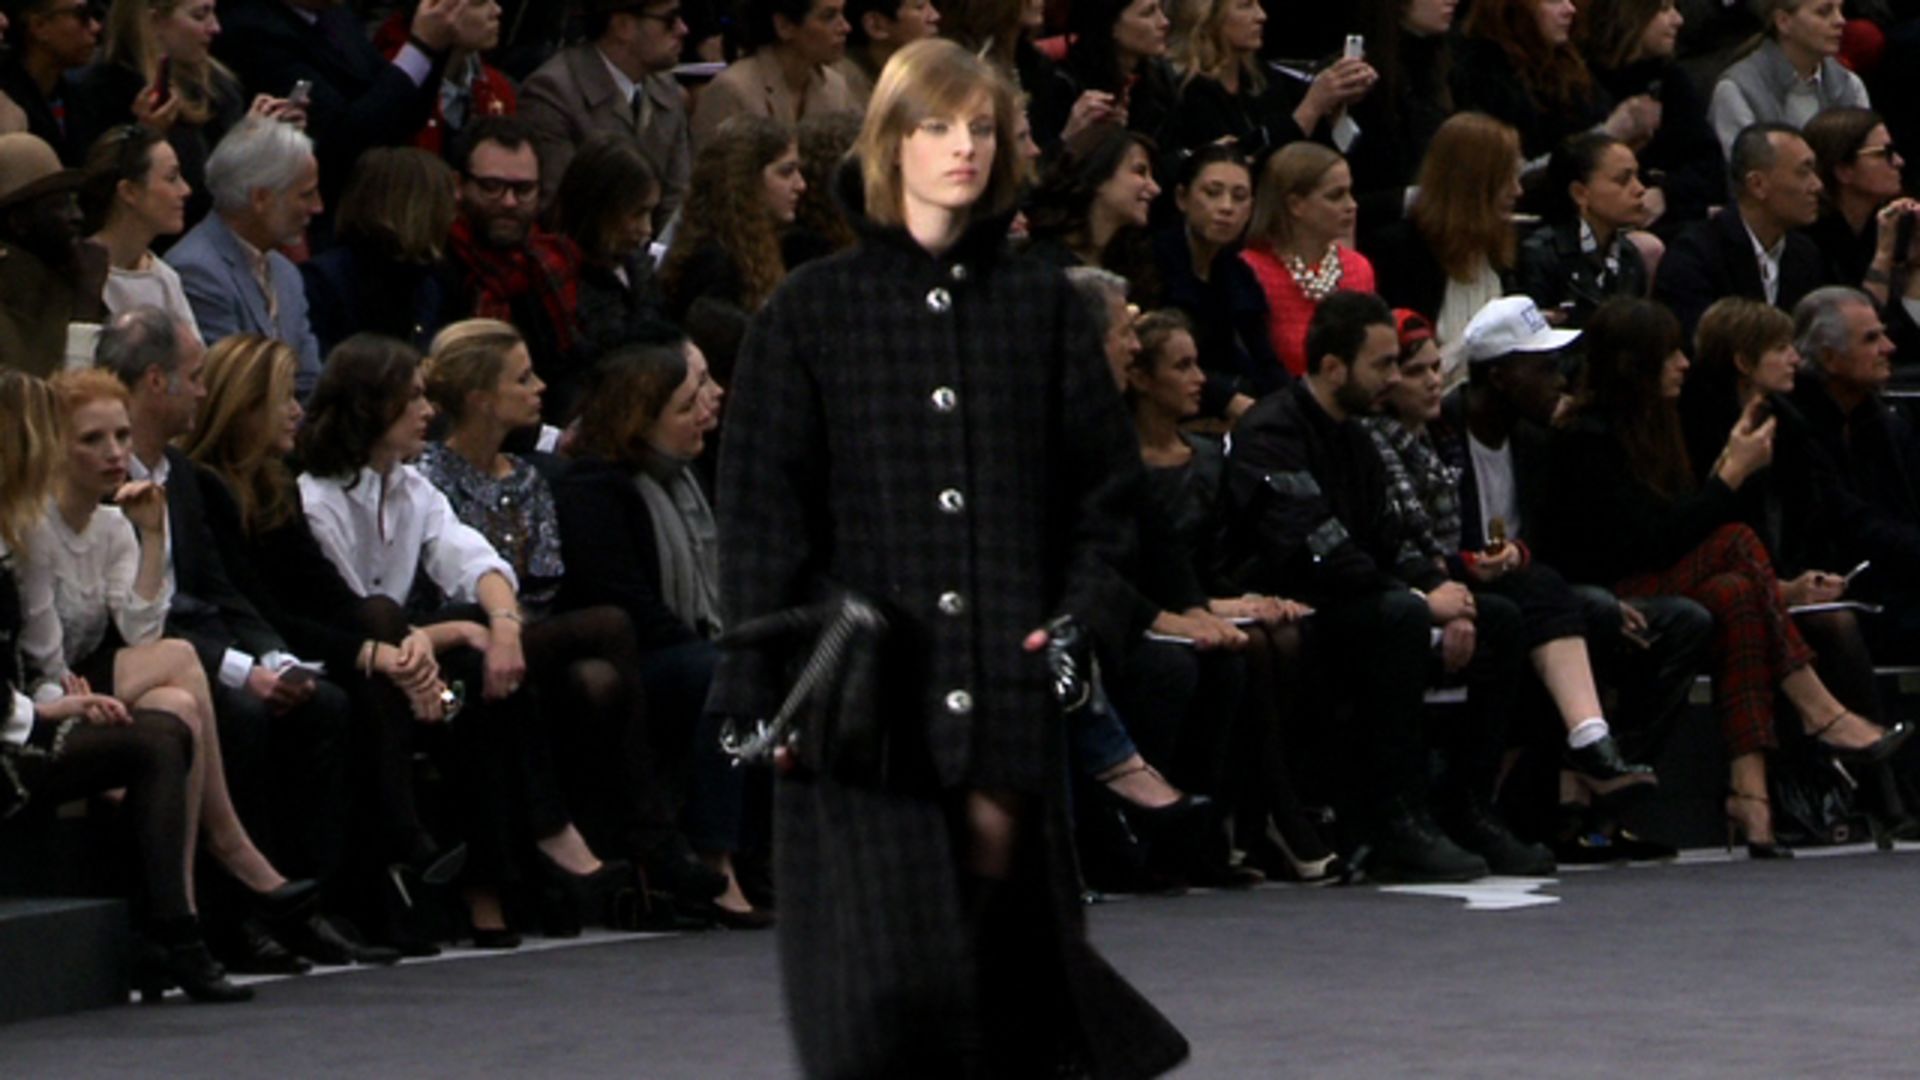 Watch Fall 2013 Ready-to-Wear: Chanel, Style.com Fashion Shows